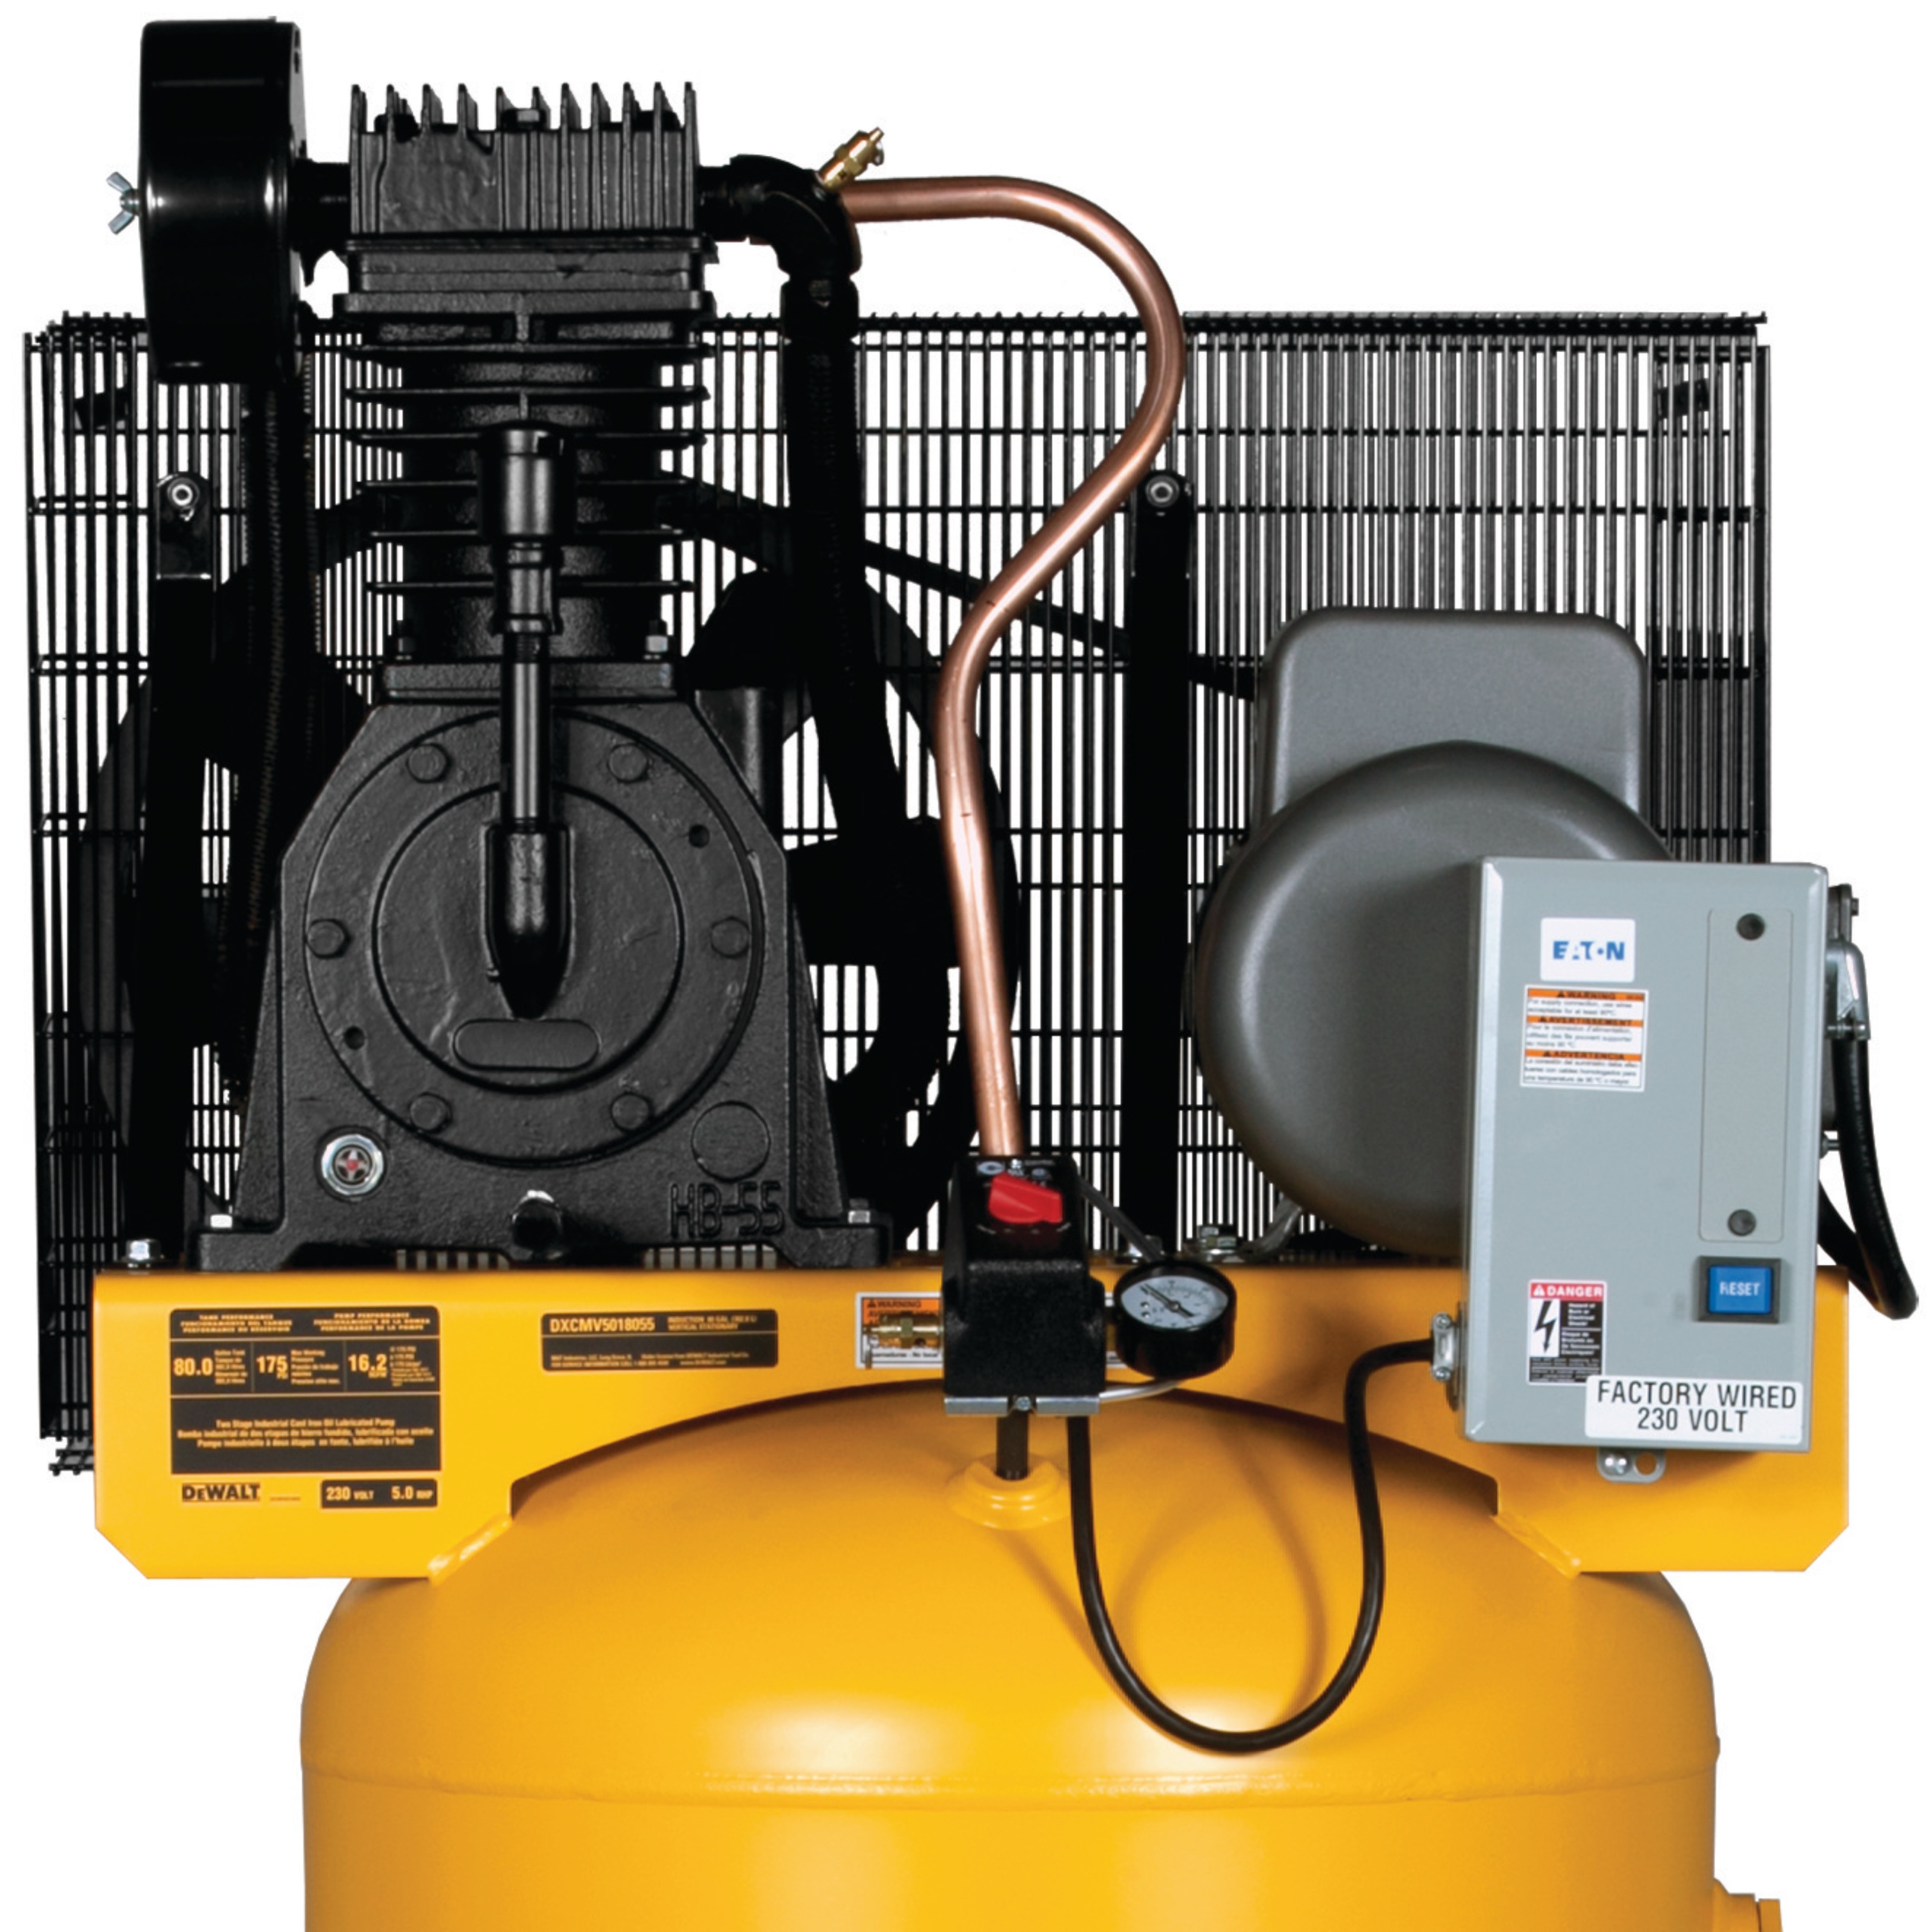 Cast iron construction for durability dependability and smooth operation feature of 80 gallons 2 Stage Stationary Electric Air Compressor.